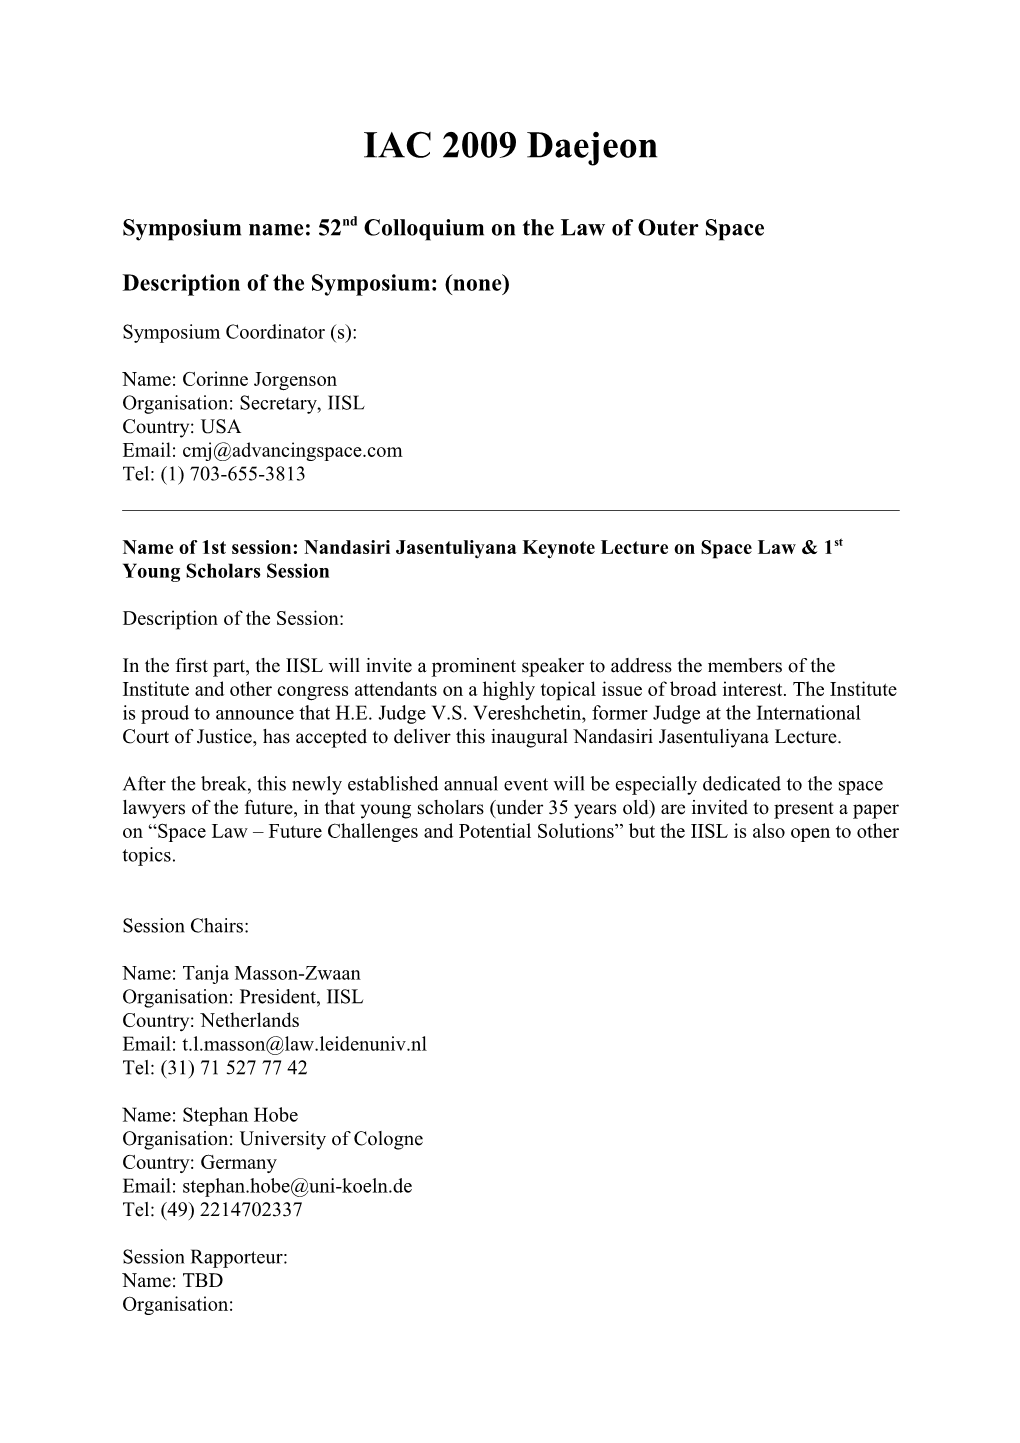 Symposium Name: 52Nd Colloquium on the Law of Outer Space